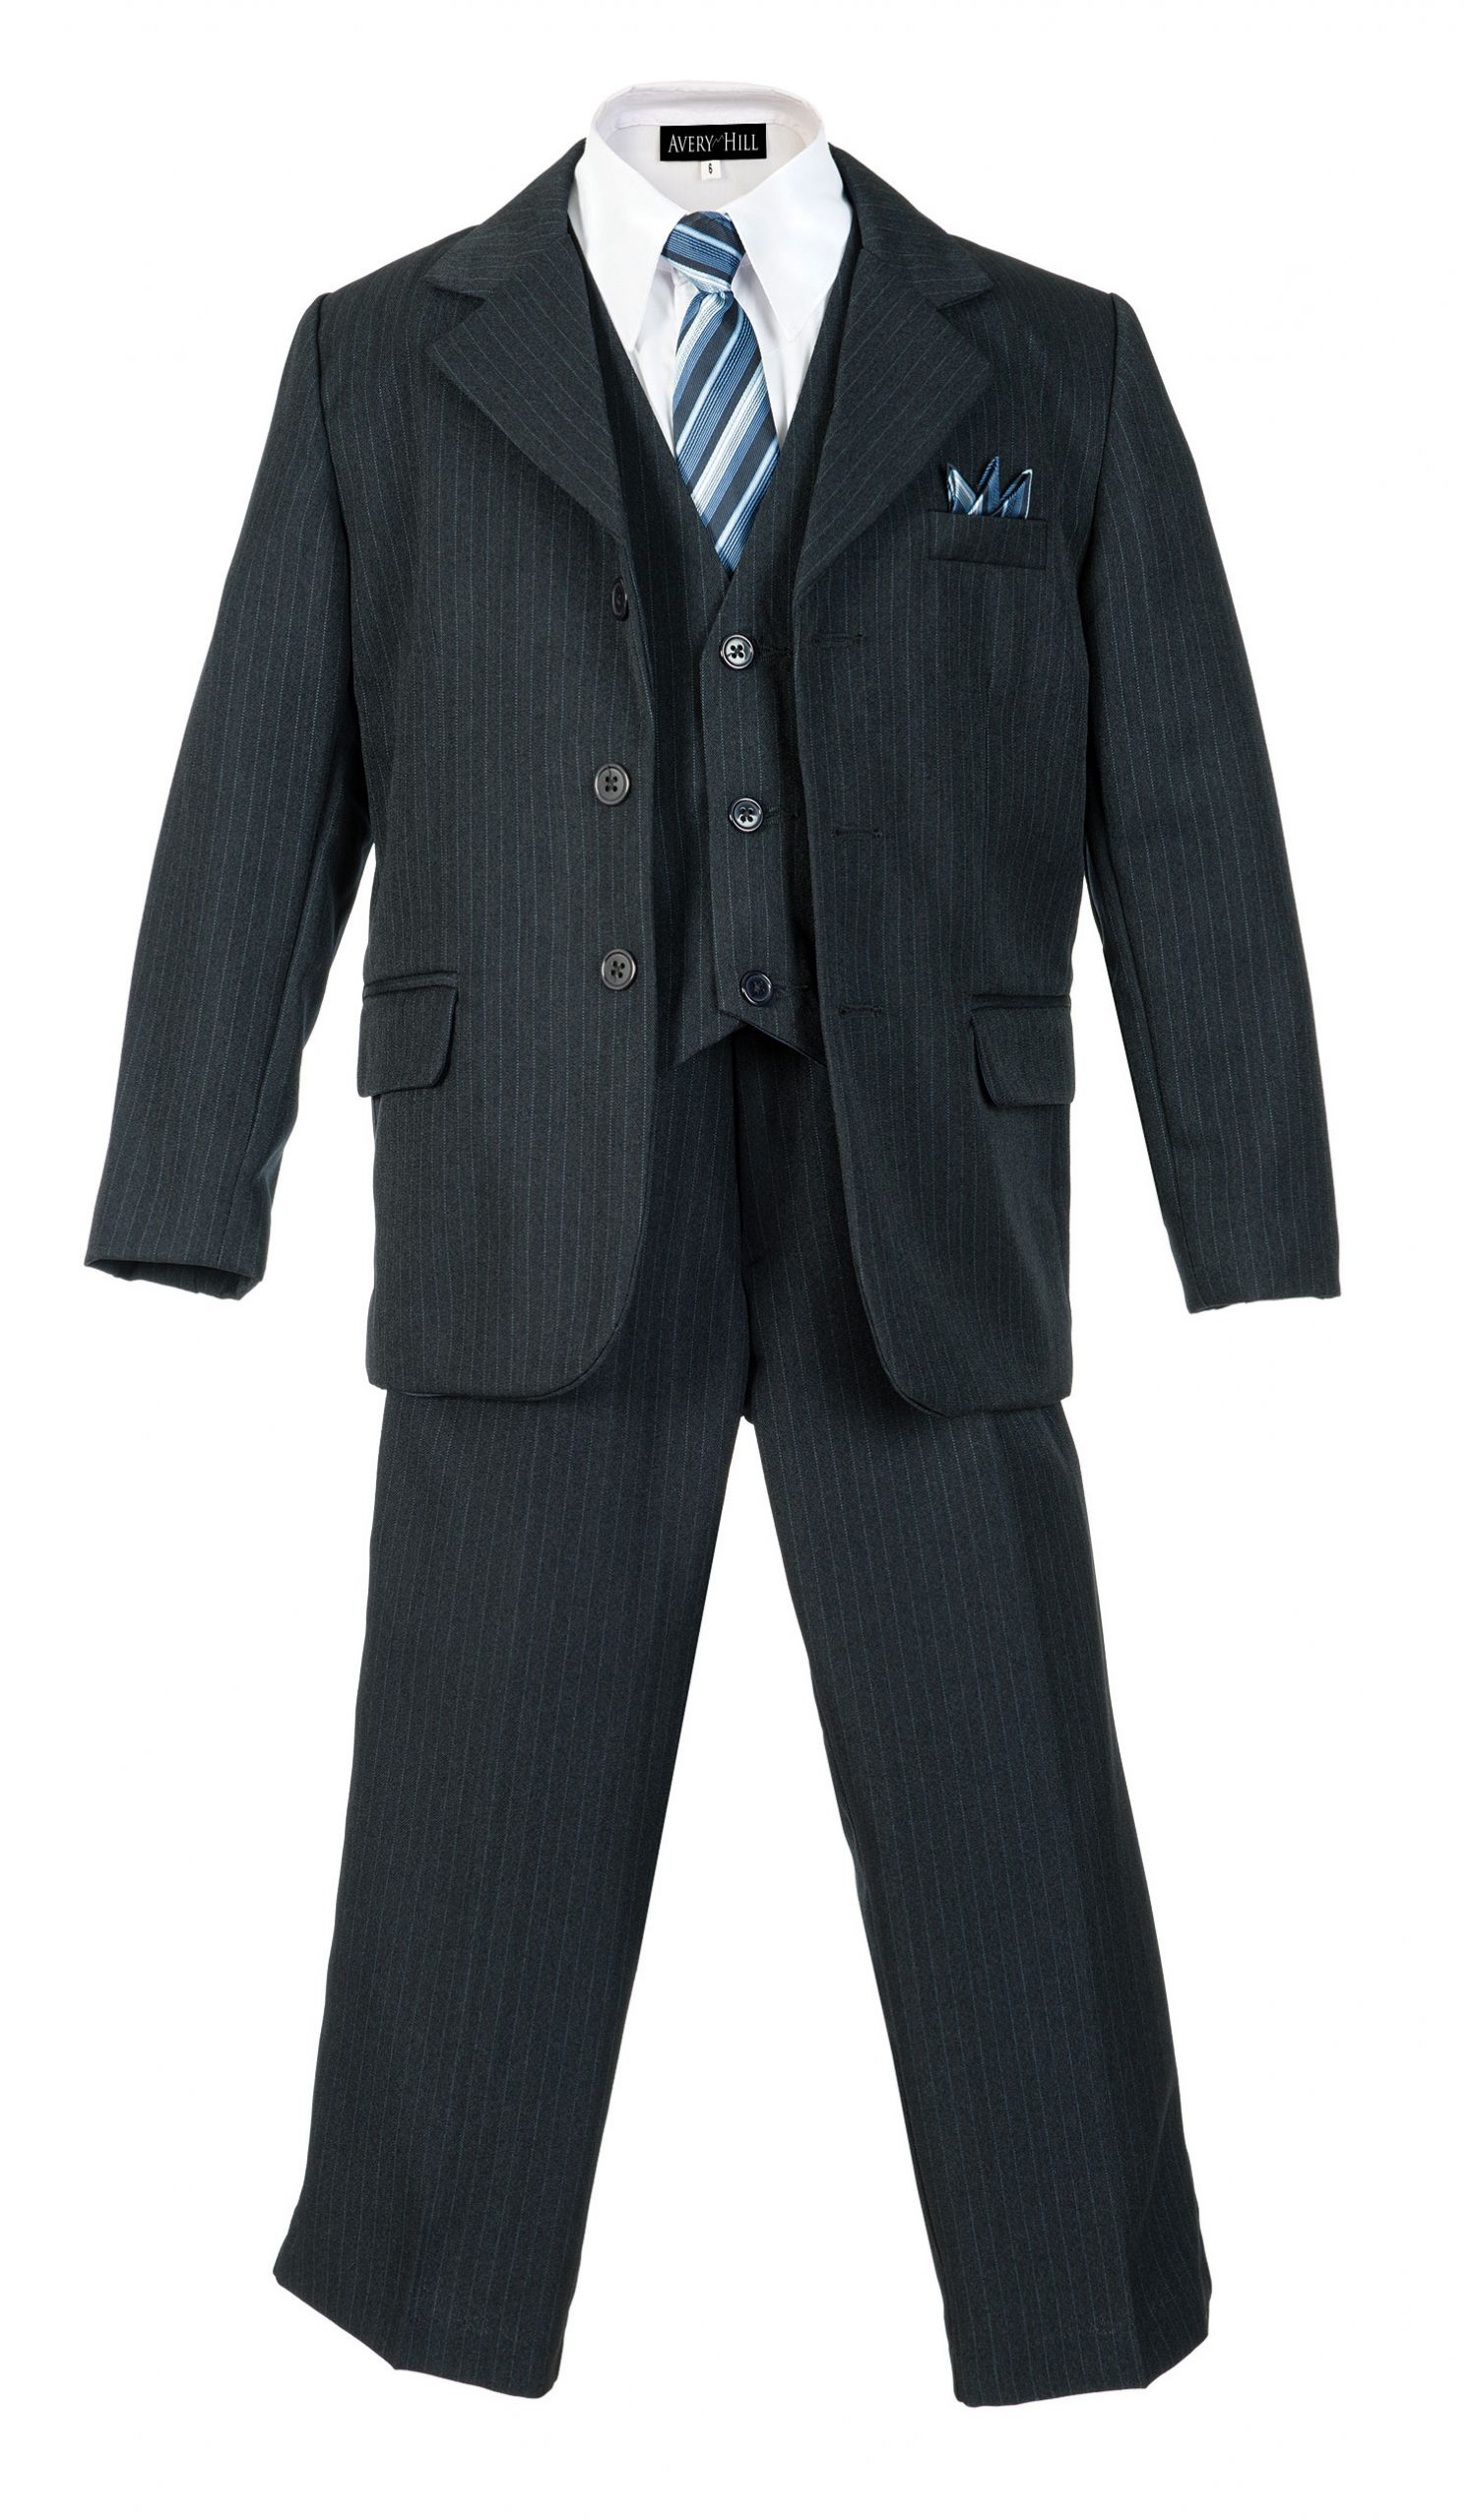 Boys Pinstripe Suit Set with Matching Tie NB 3T